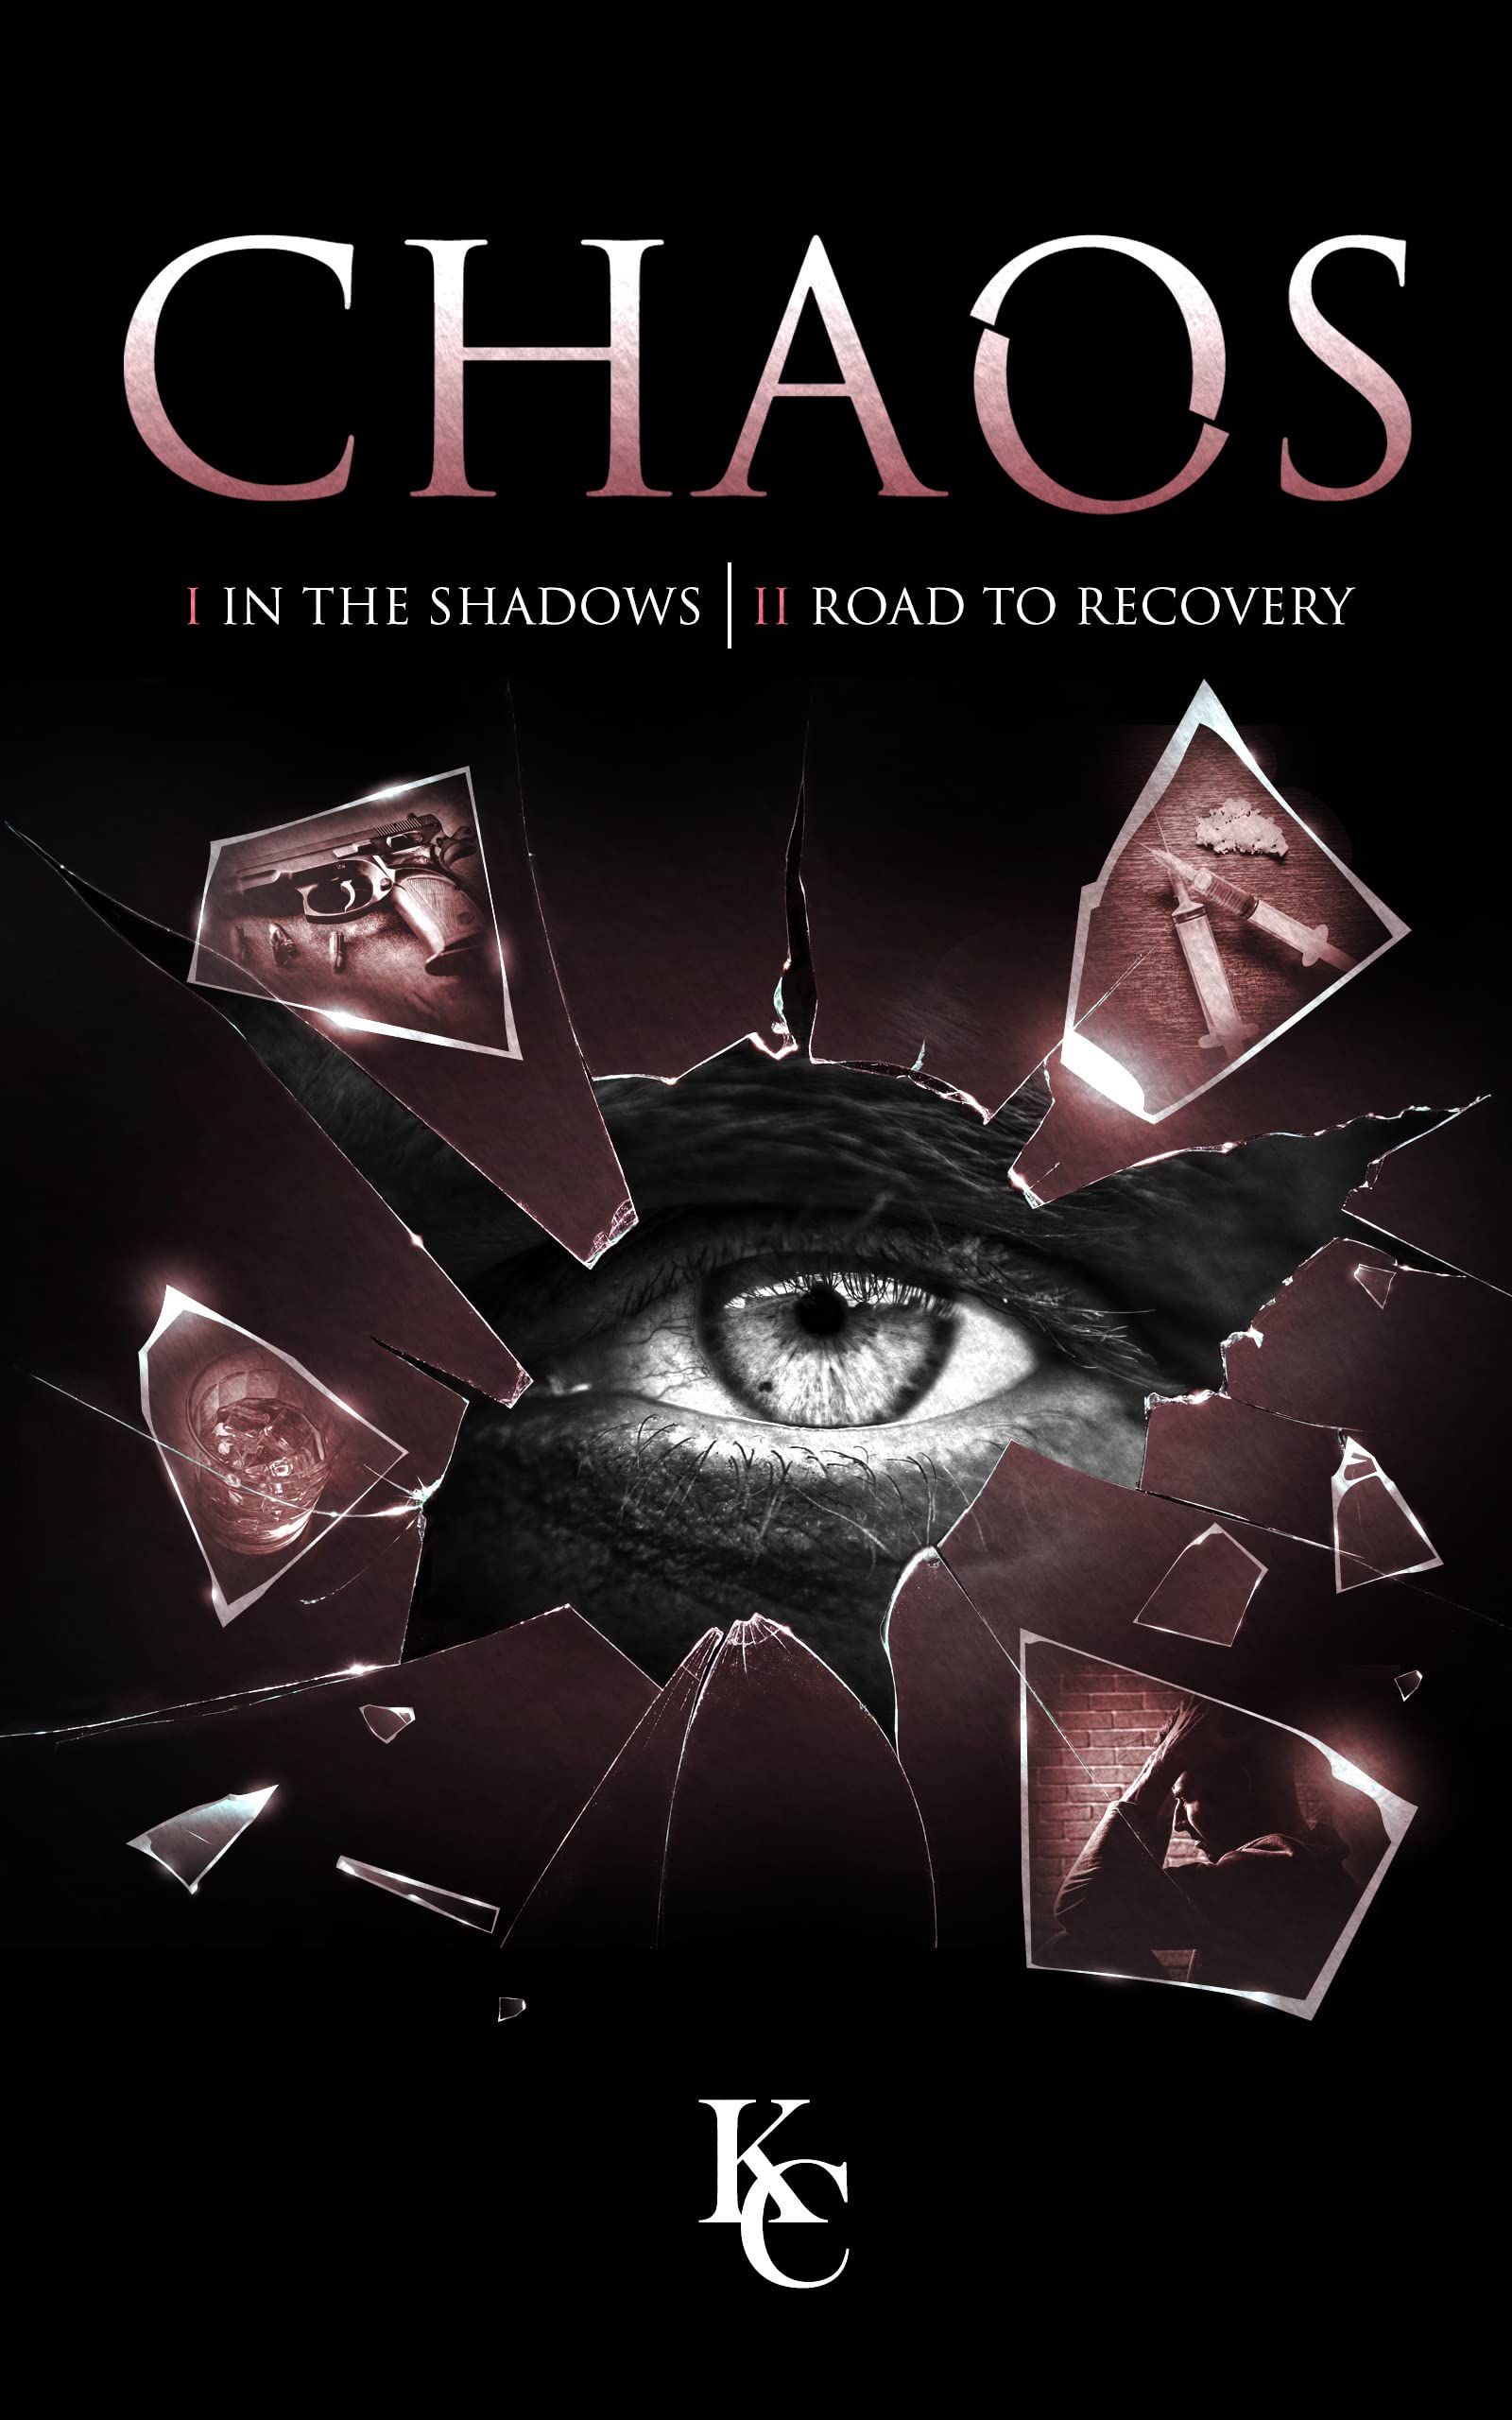 The front cover of Chaos: I In the Shadows | II Road to Recovery